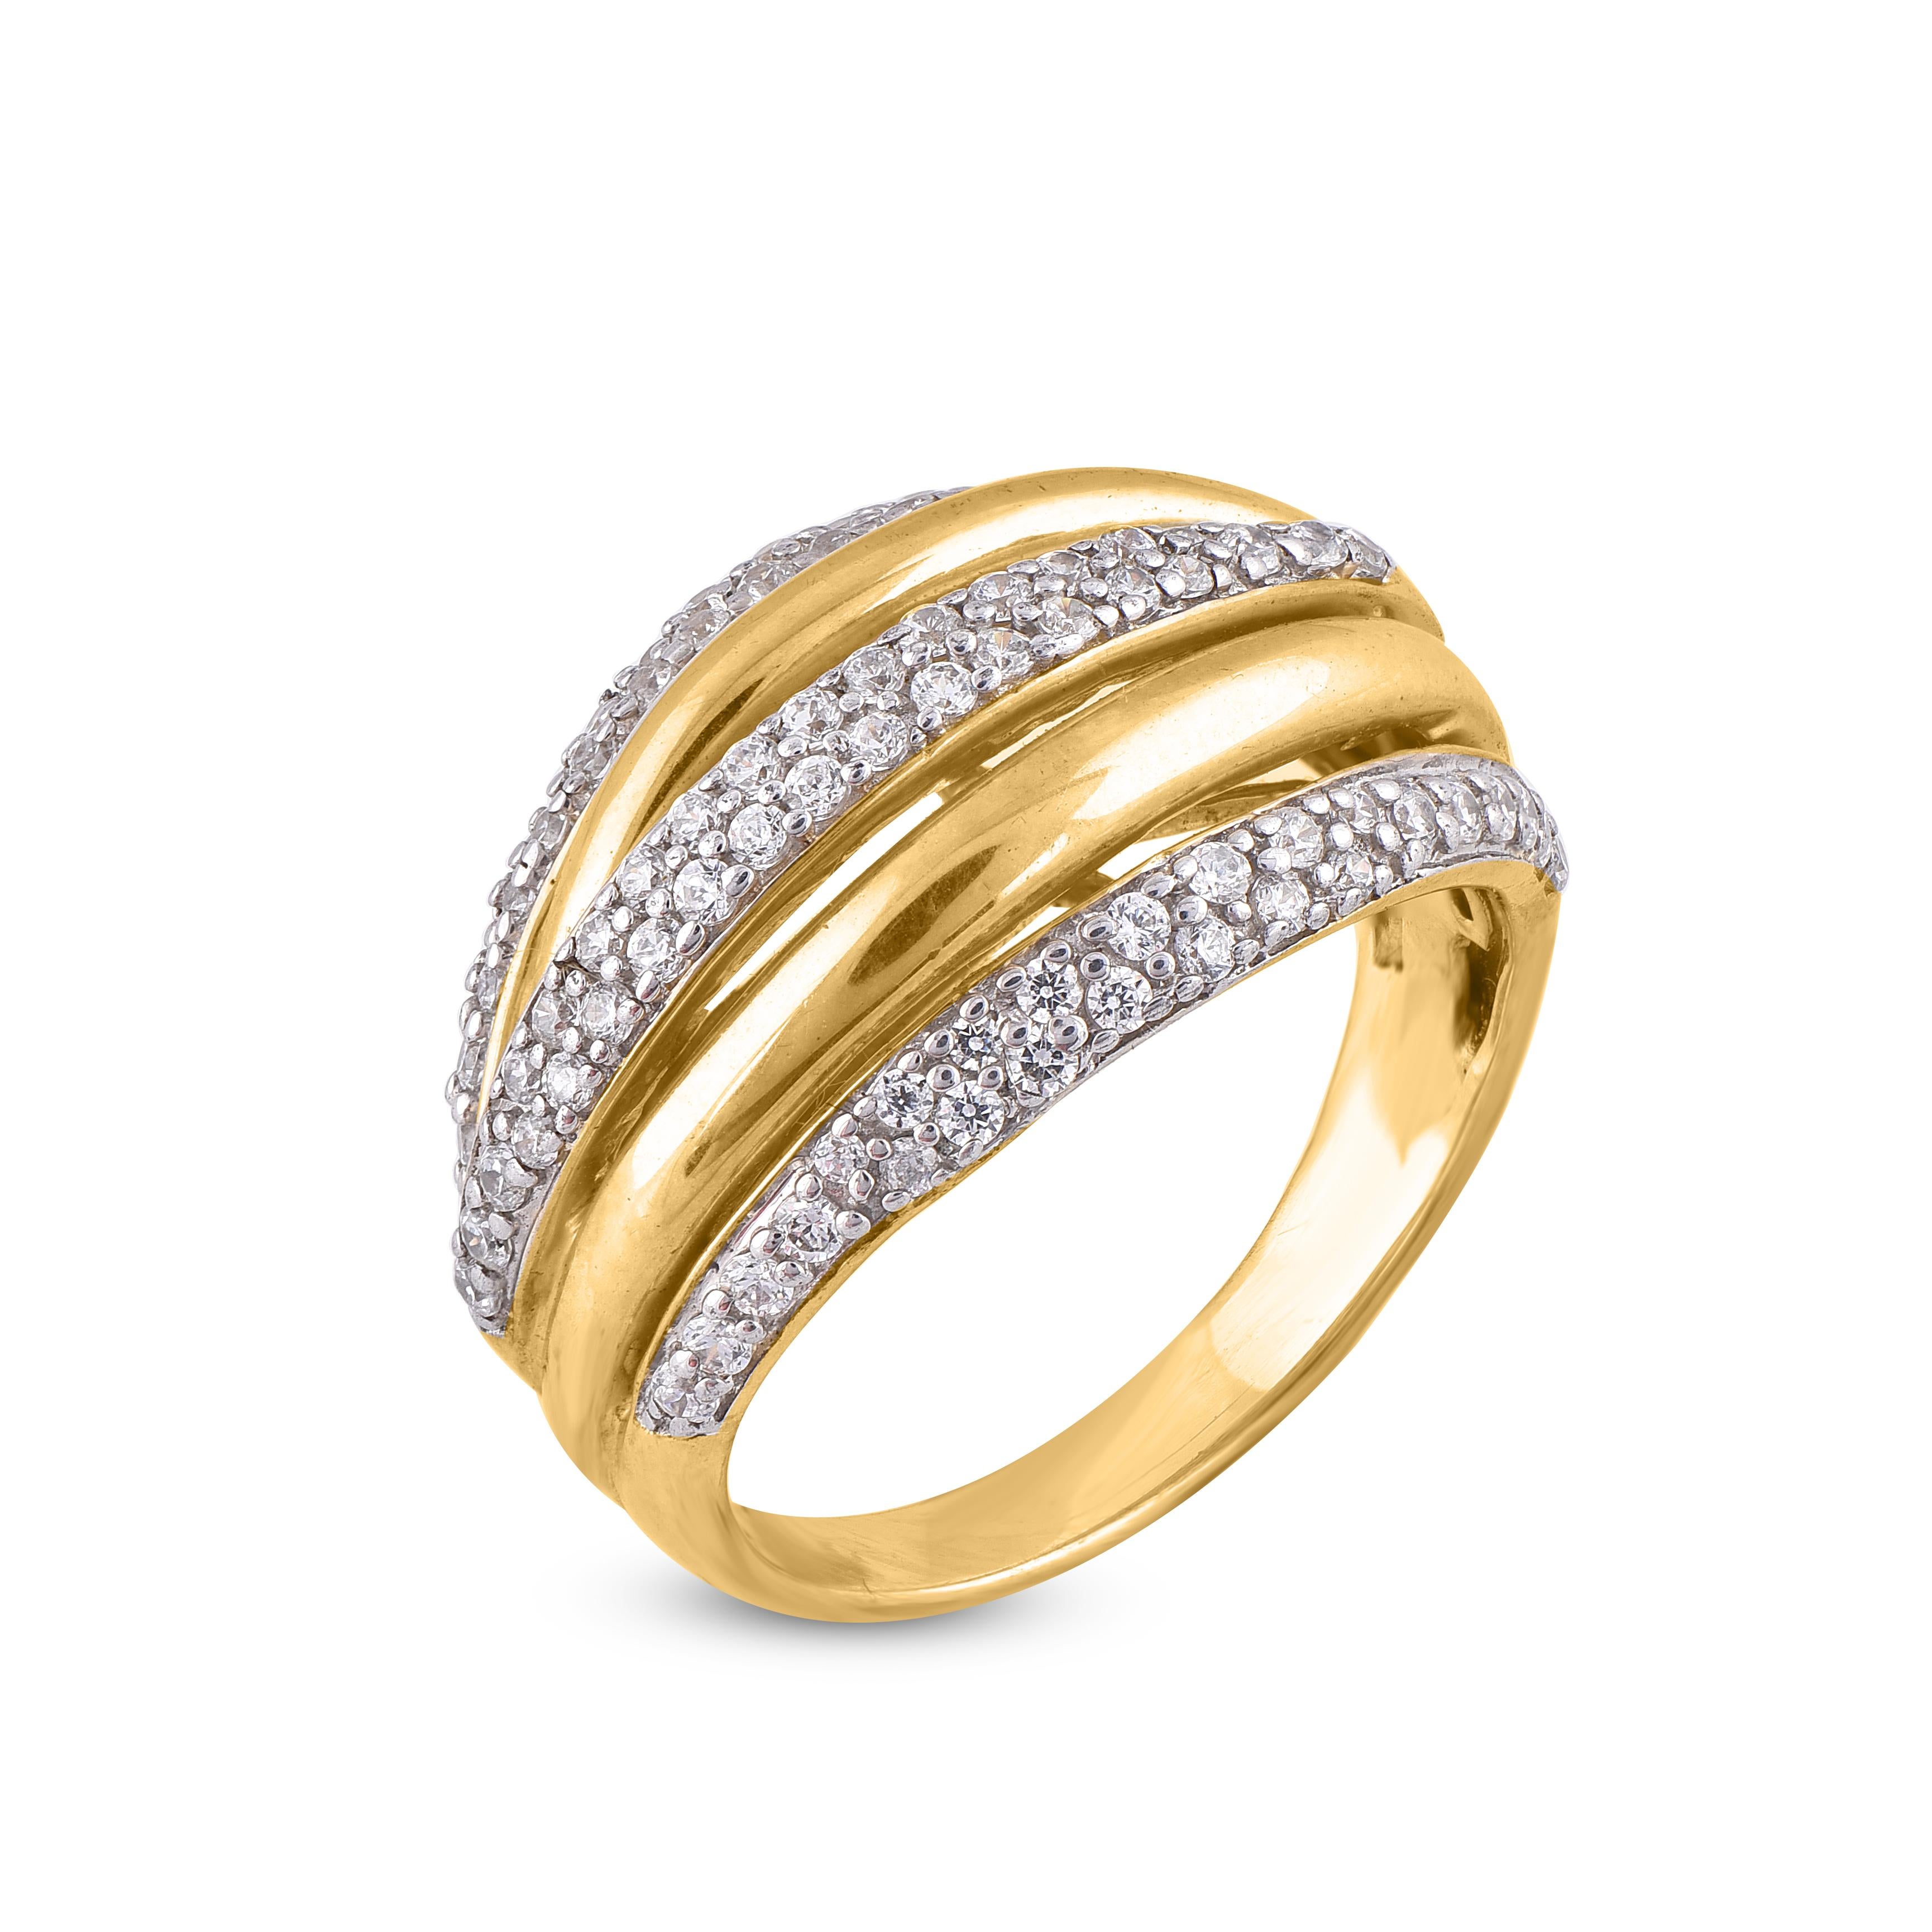 This wide wedding band is expertly crafted in 14 Karat Yellow Gold and features 88 Round Brilliant-cut White diamonds set in pave setting. We only use 100% natural and conflict free diamonds which sparkles in H-I color I2 clarity. This ring has high